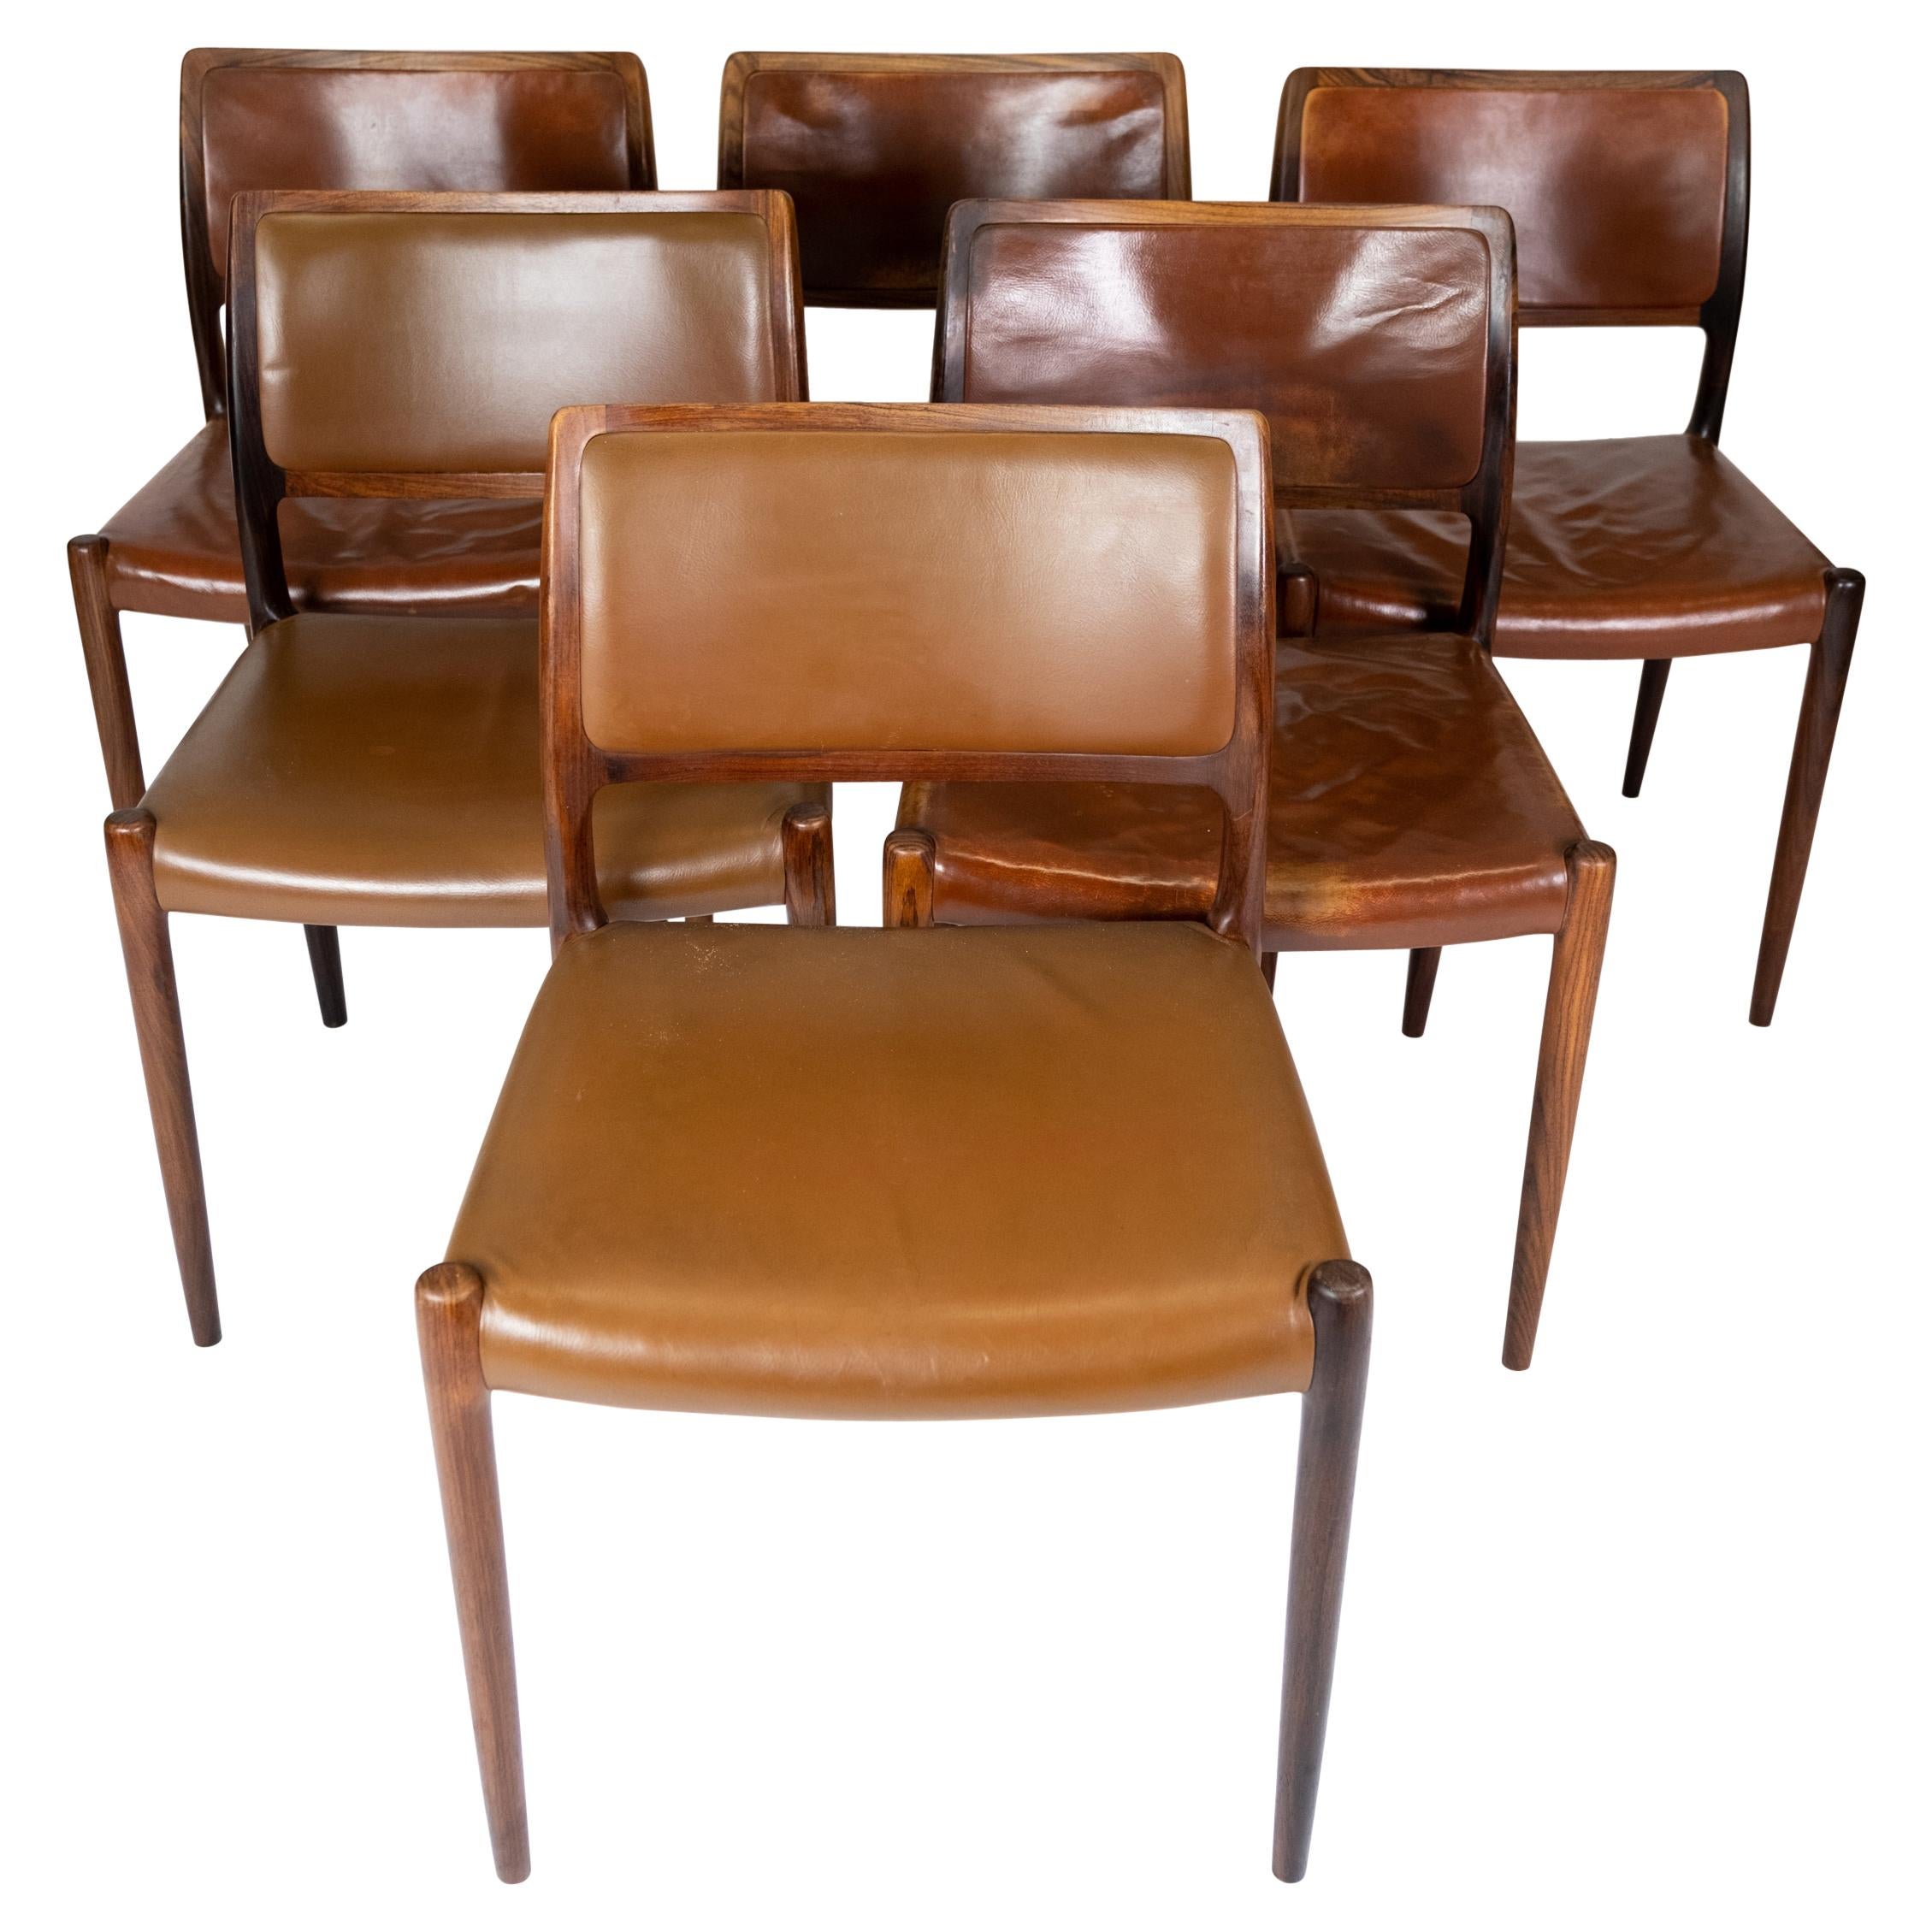 Set of 6 Dining Chairs, Model 80, in Rosewood Designed by N.O. Møller